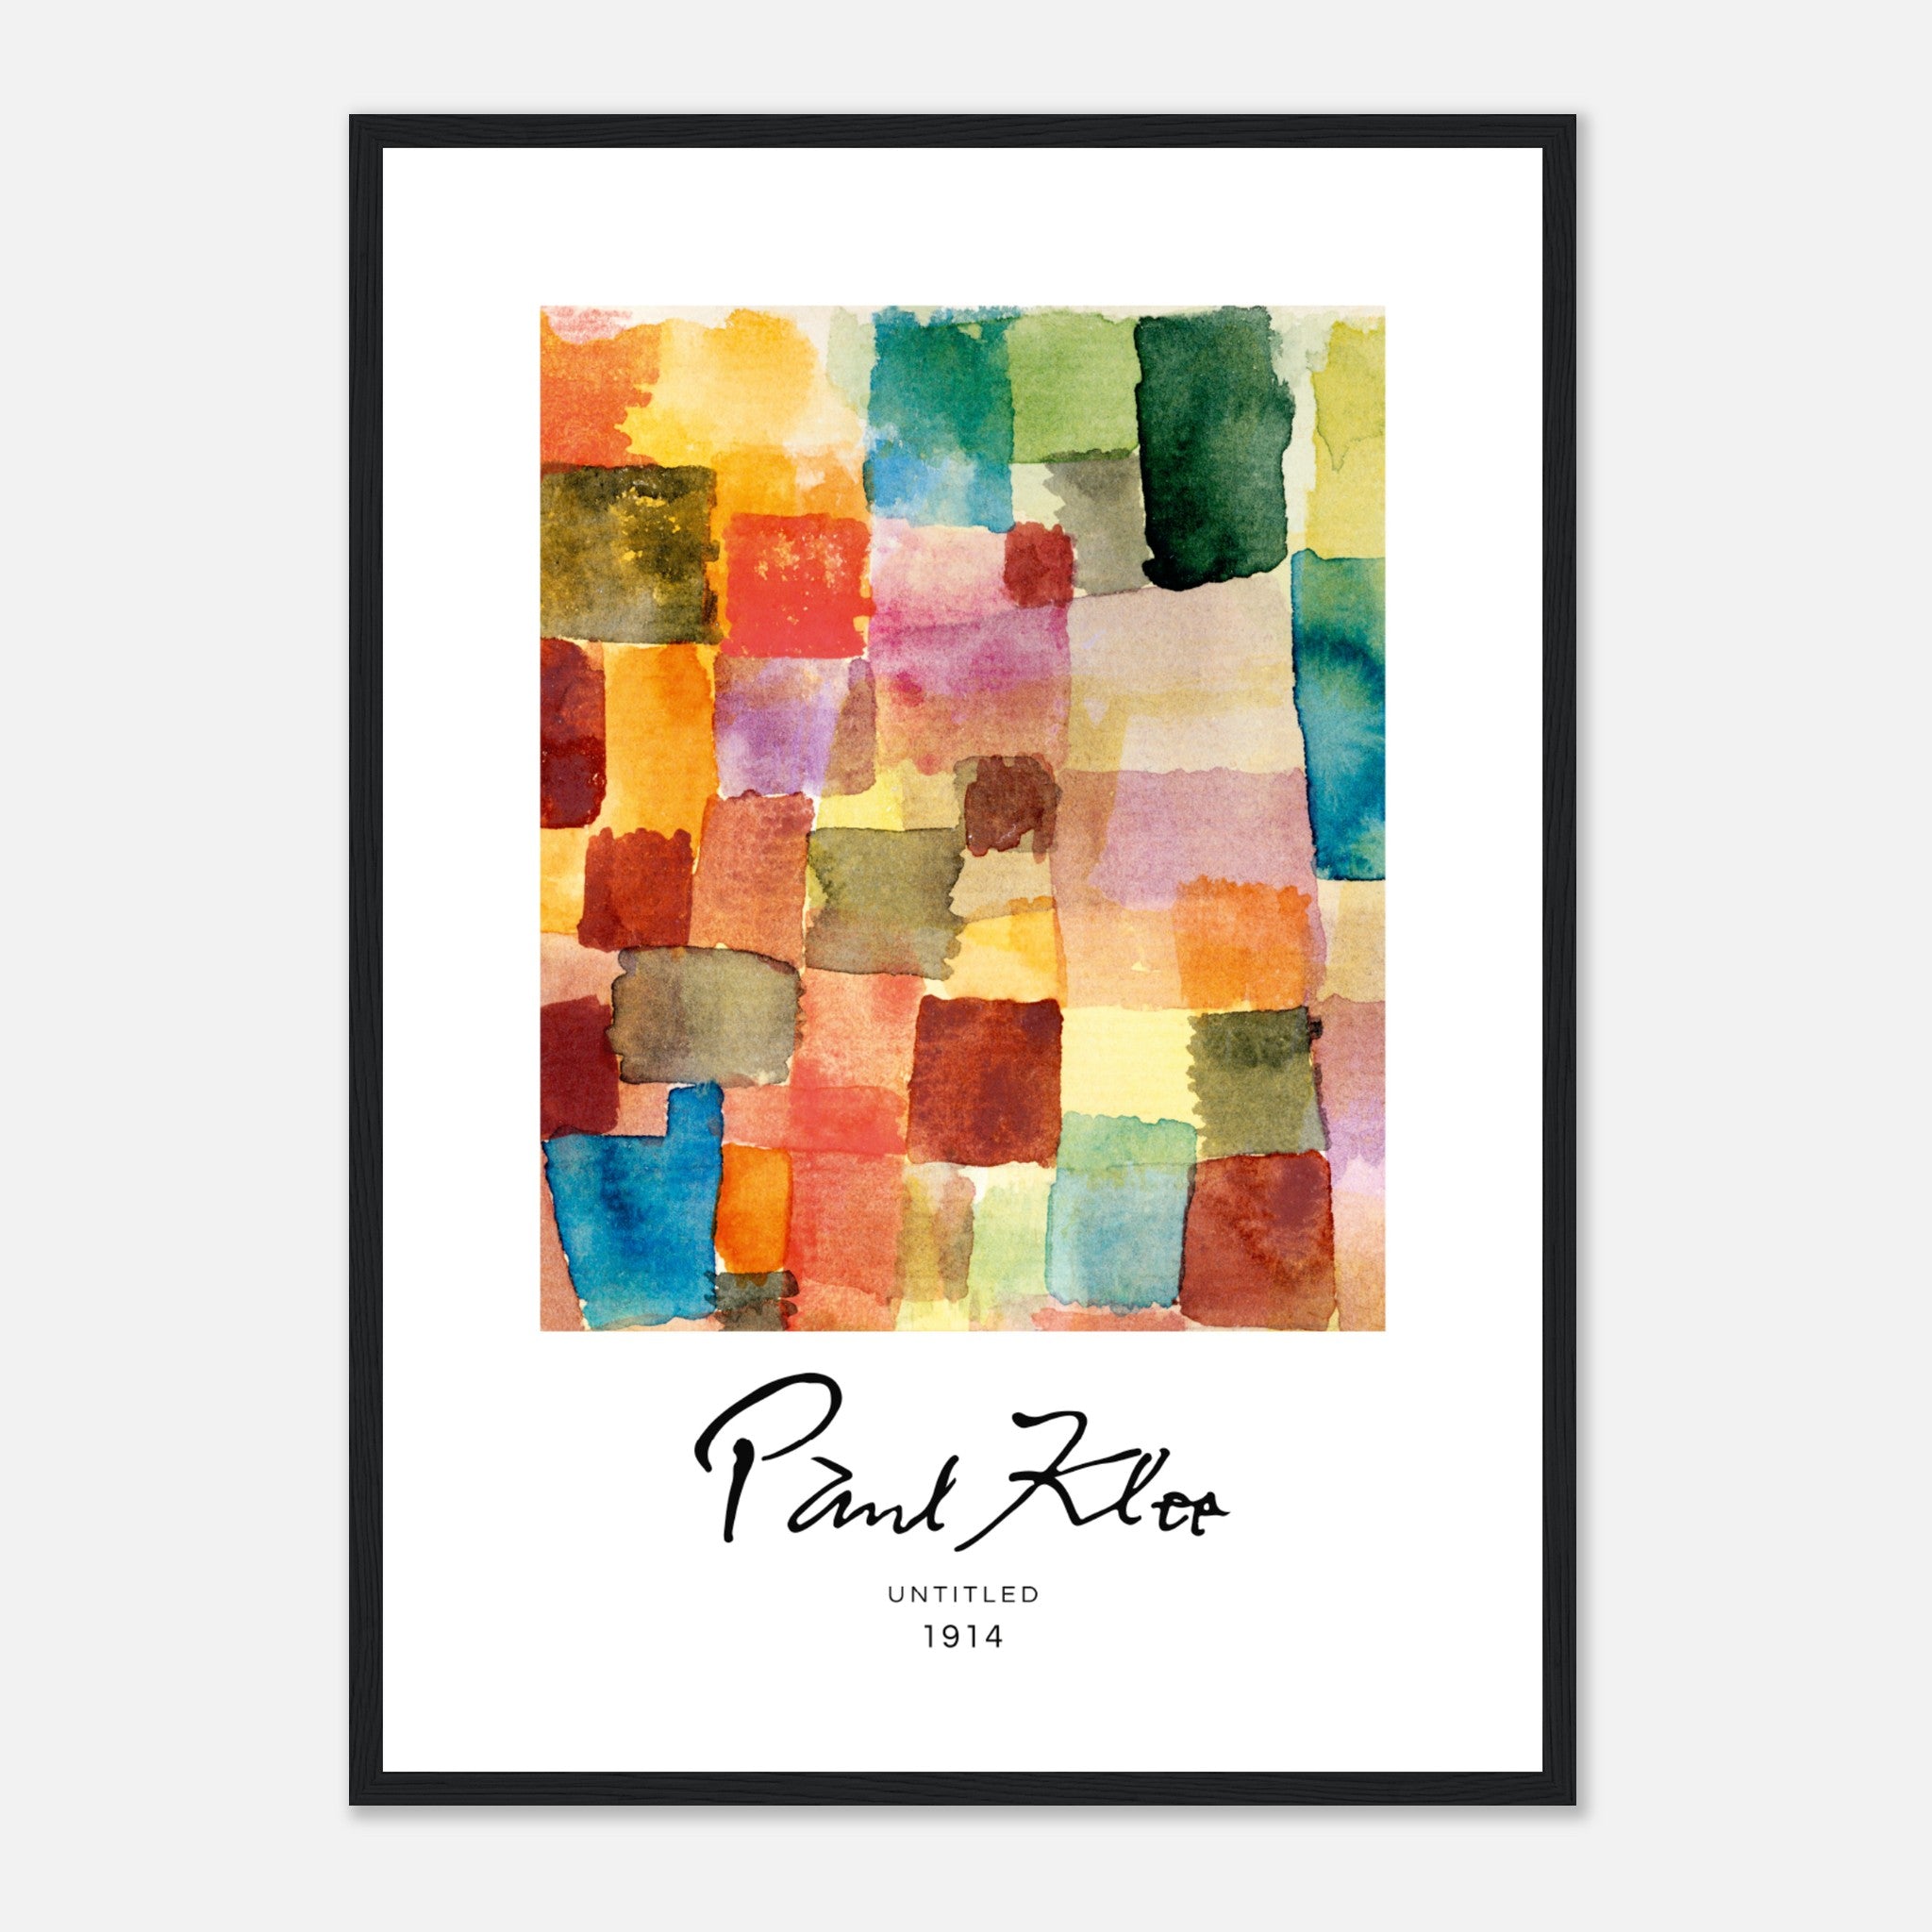 Untitled by Paul Klee Poster